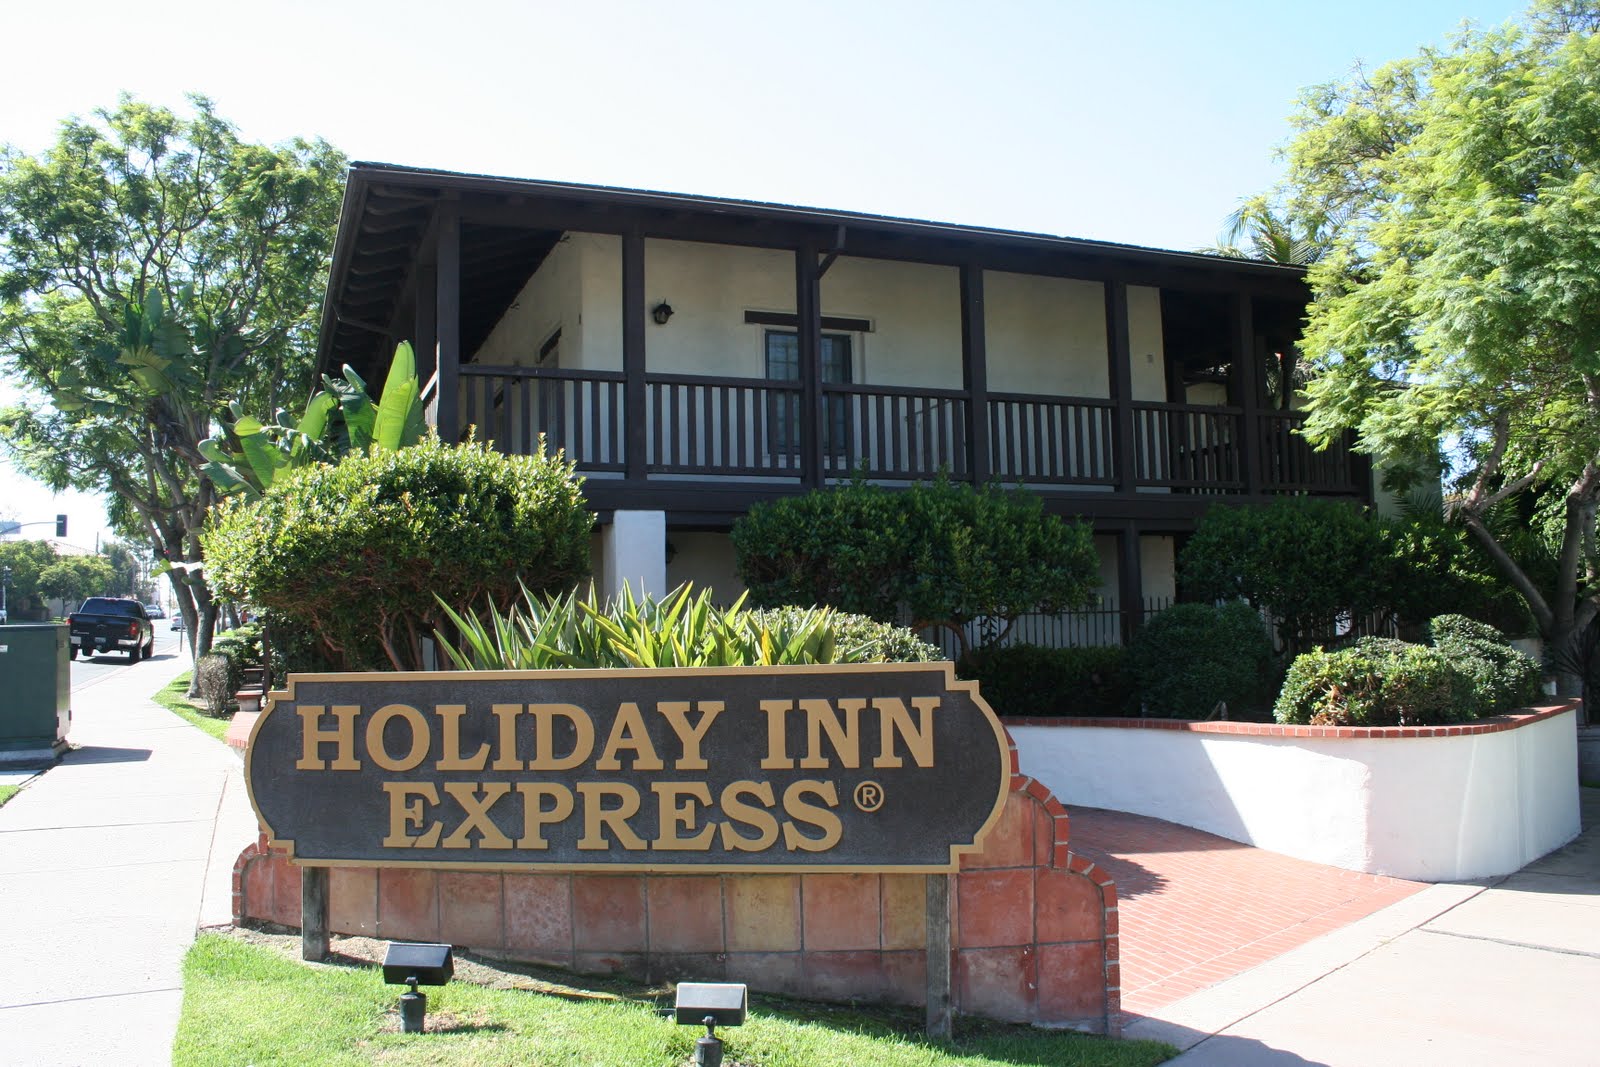 Travel by Simon: Hotel review - Holiday Inn Express San ...